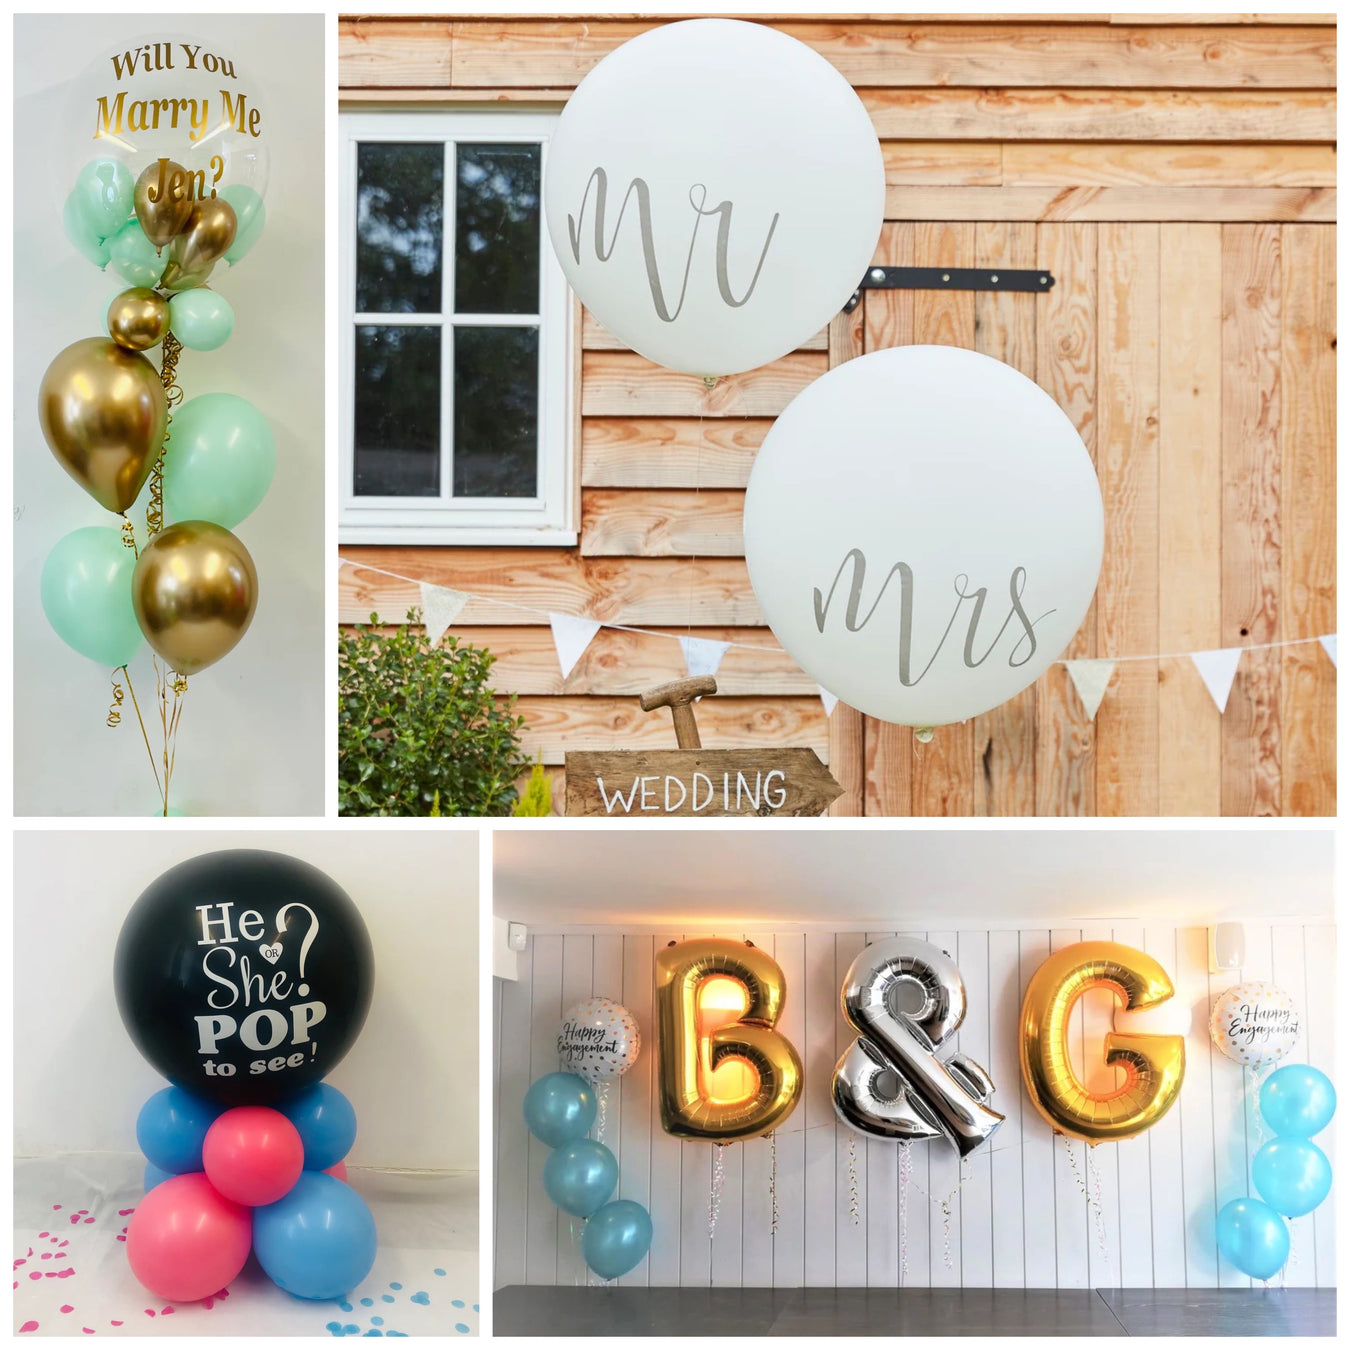 Special Occasion Balloon Displays (collections)